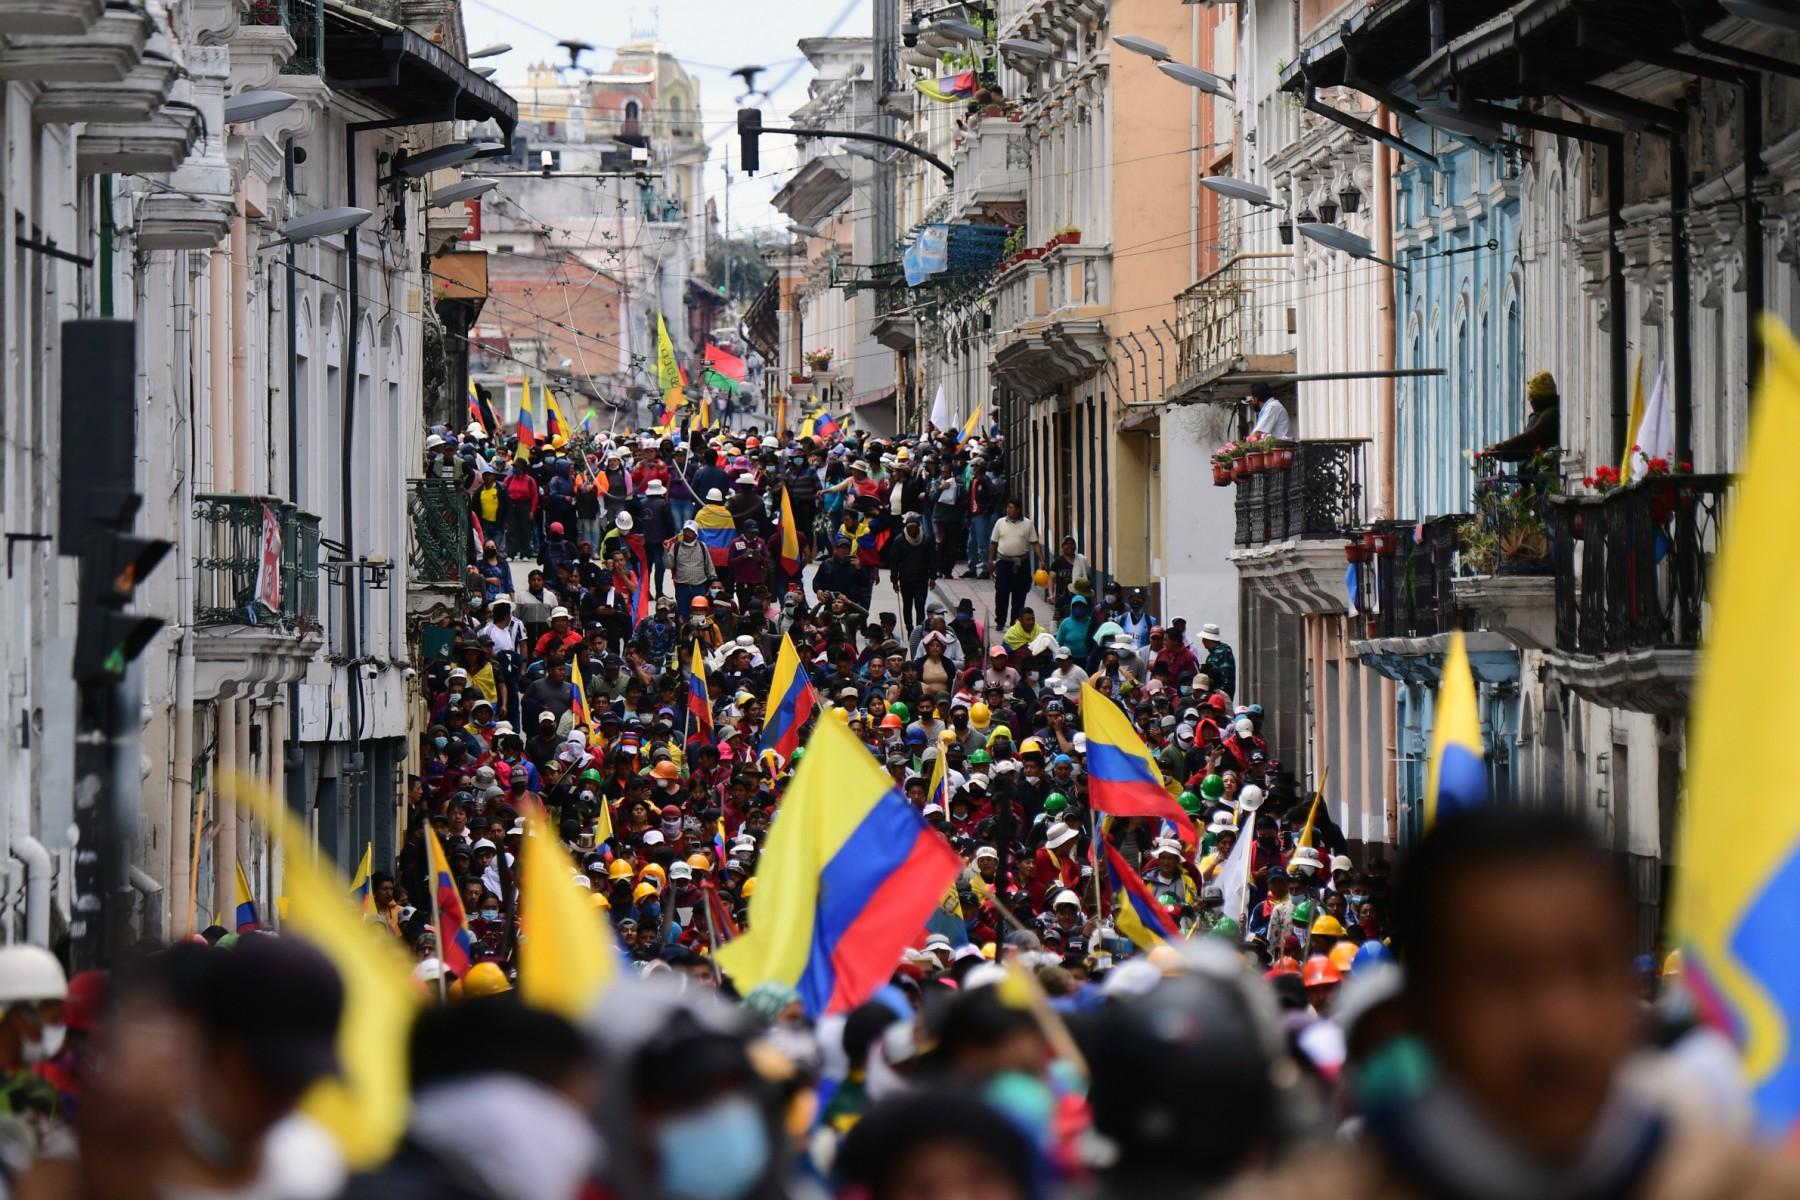 Indigenous people march towards the Carondelet Presidential Palace, in Quito, on June 27. Indigenous protesters in Ecuador have vowed to continue a disruptive country-wide protest against high living costs, rejecting a fuel price cut announced by the government as insufficient and 'insensitive'. Photo: AFP